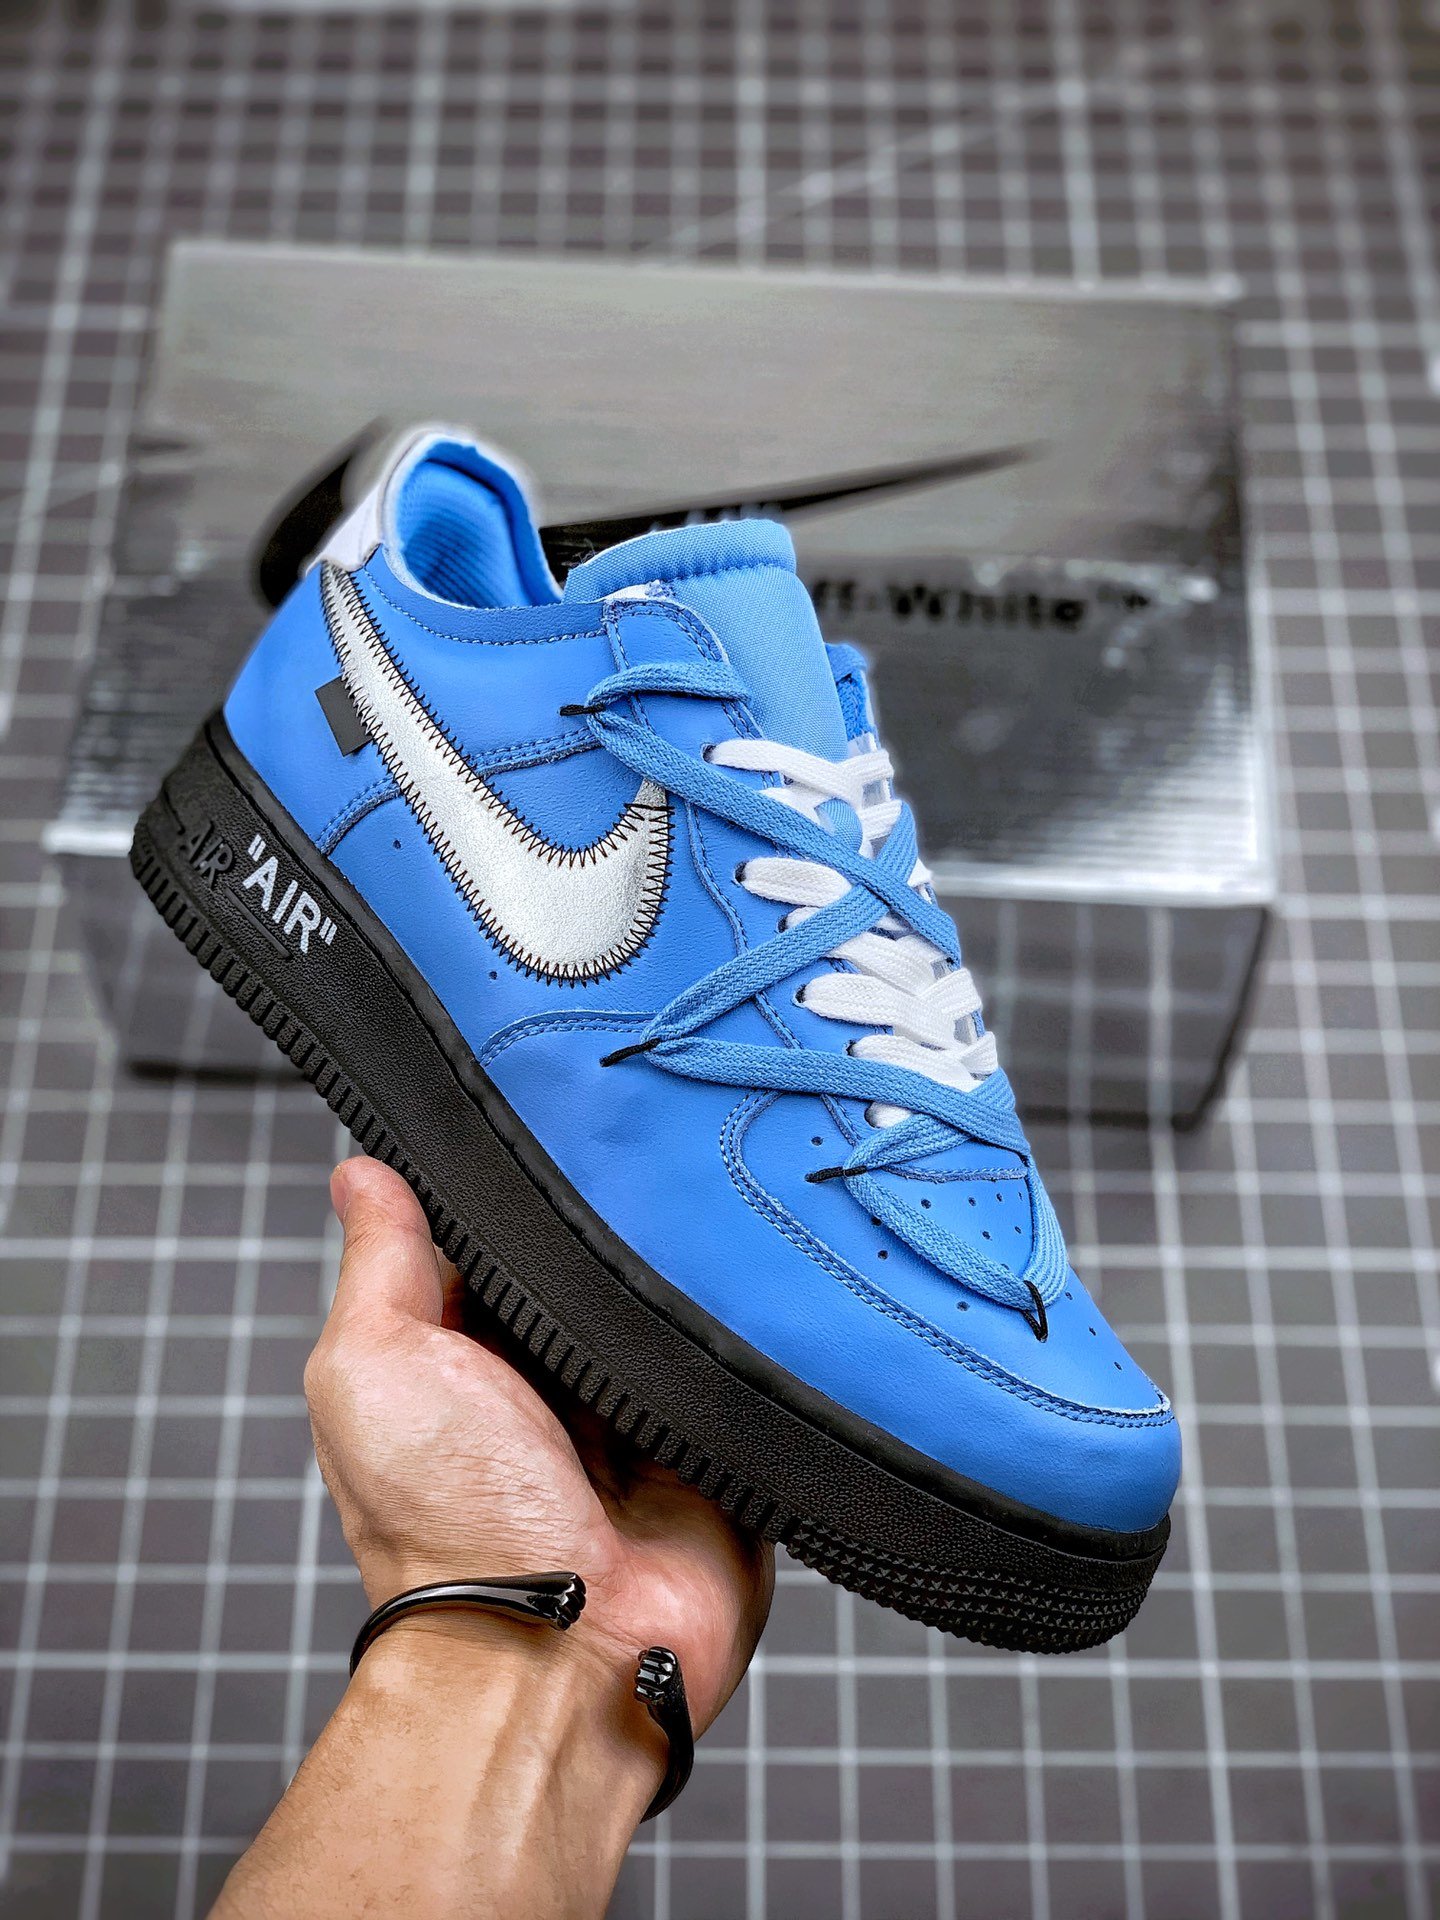 Off-White x Nike Air AF Force 1 Low "MCA" Sample Shoes